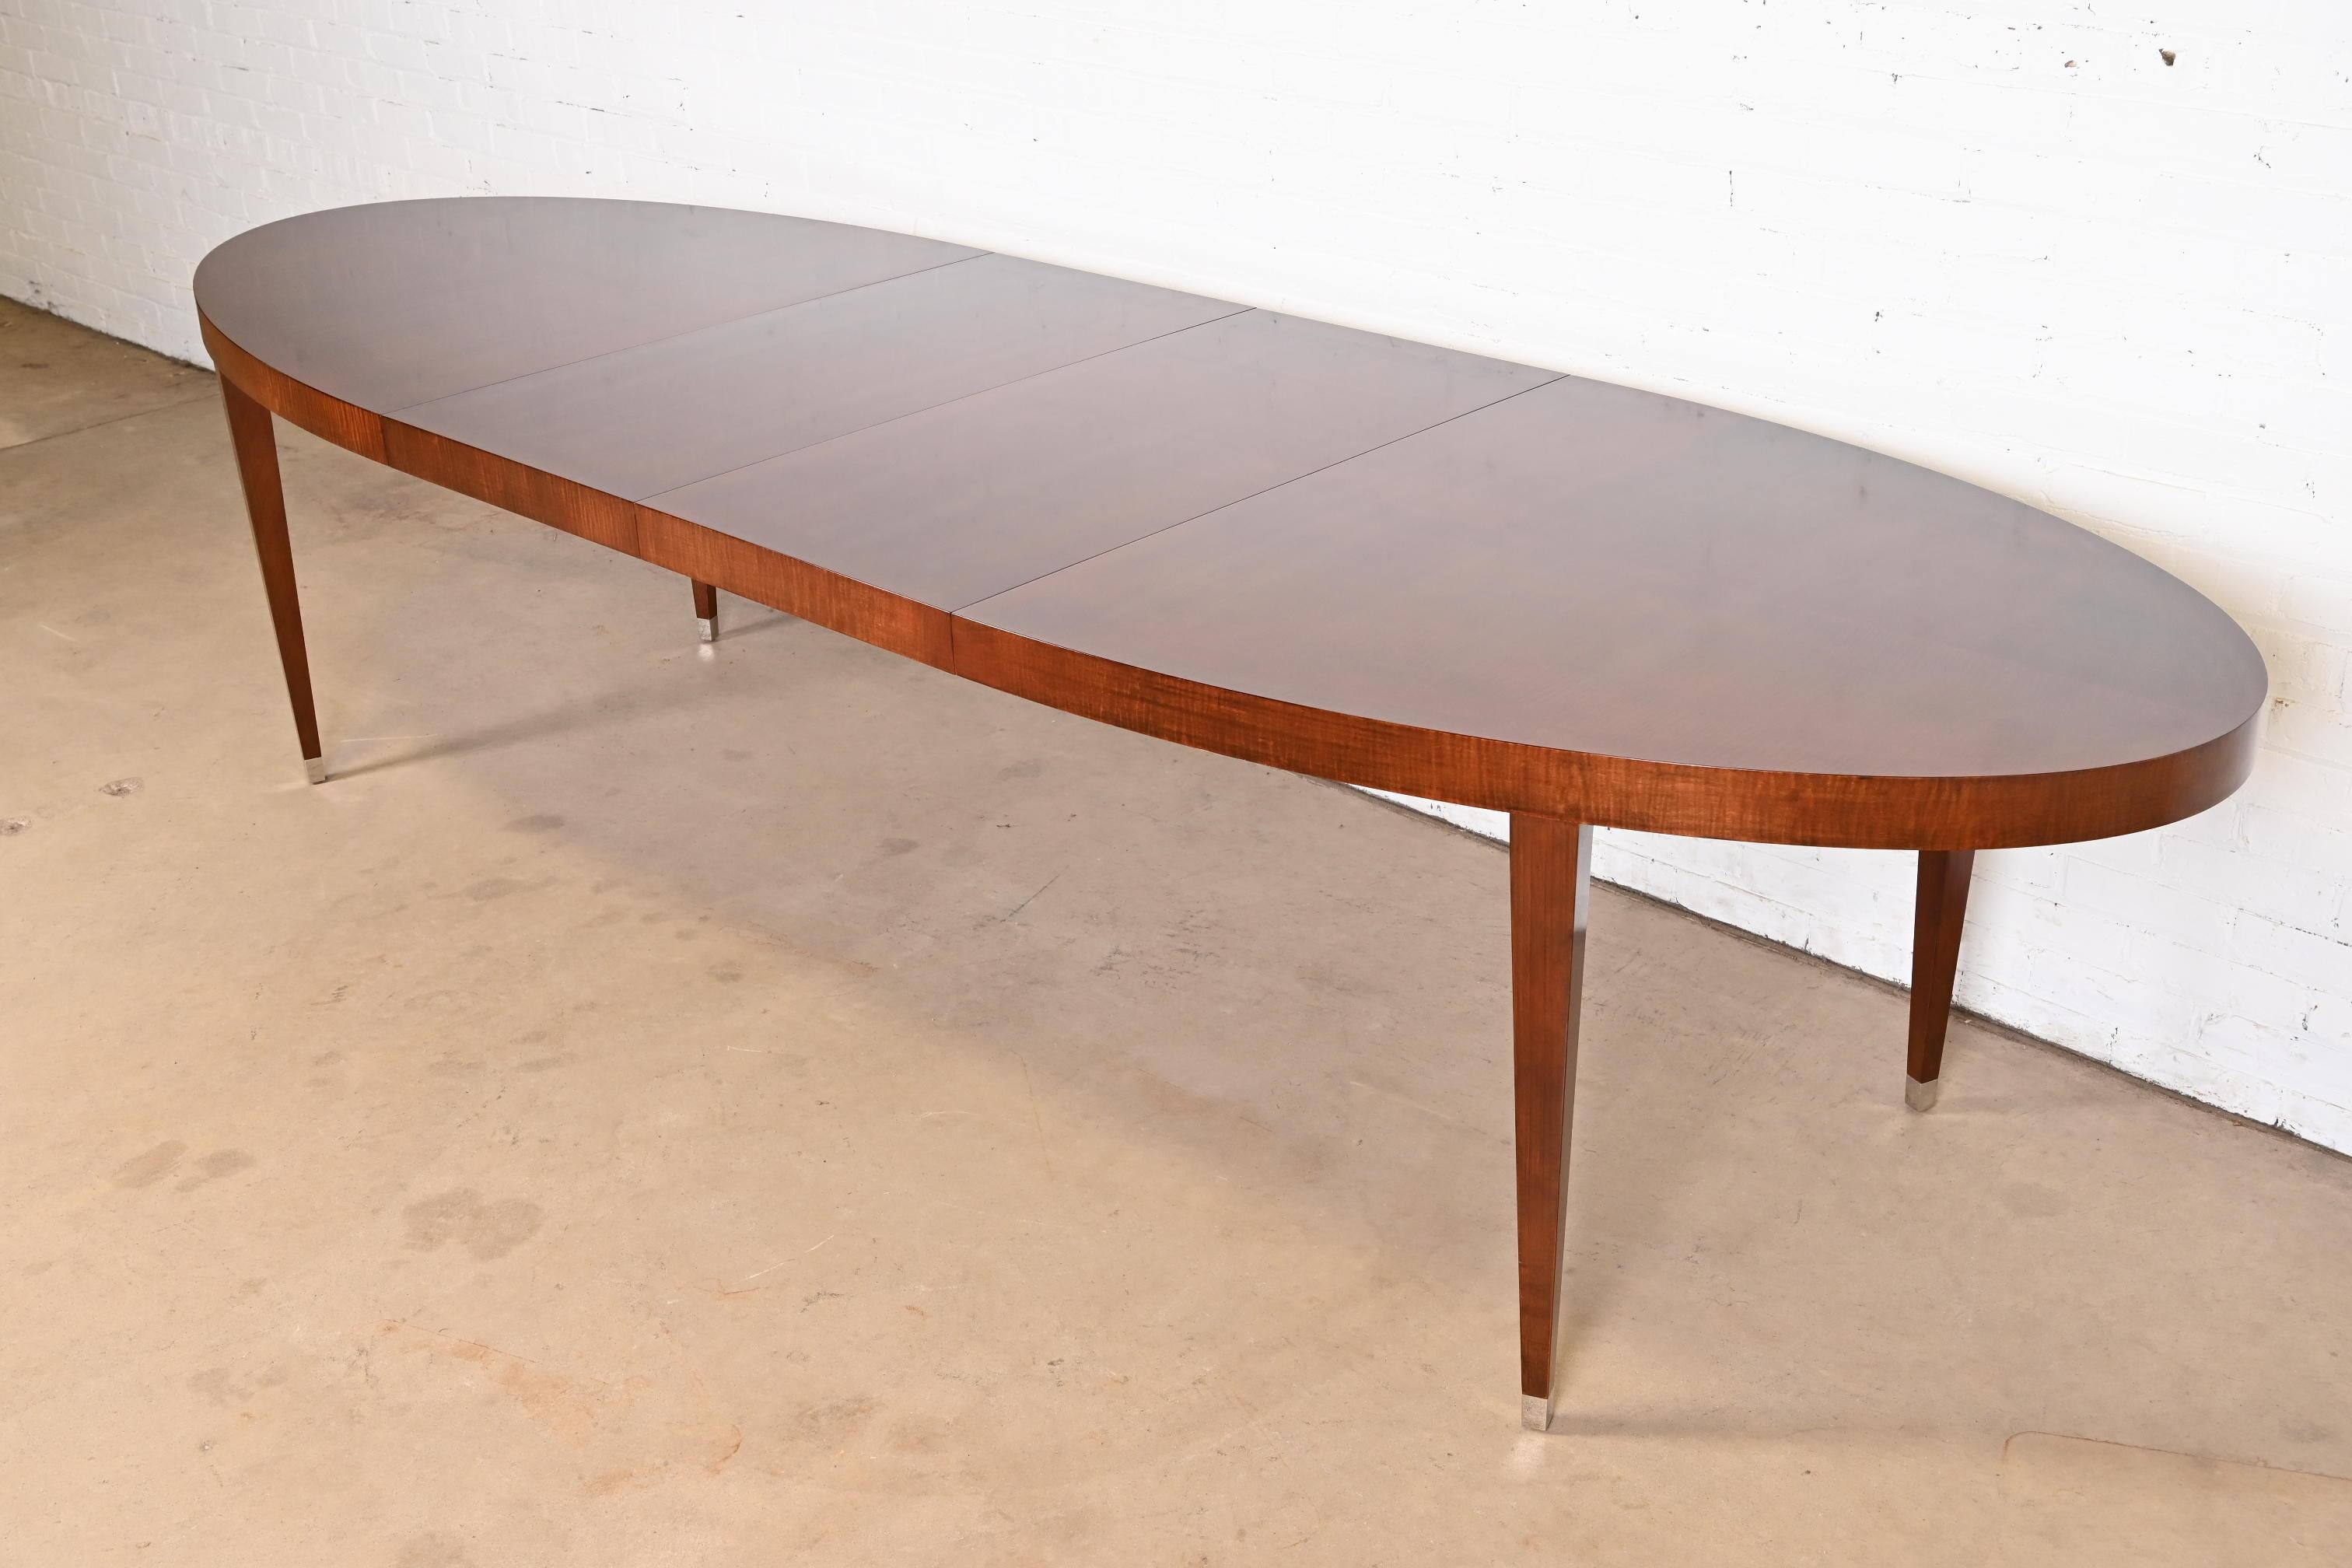 Michael Vanderbyl Modern Regency Mahogany Extension Dining Table In Good Condition For Sale In South Bend, IN